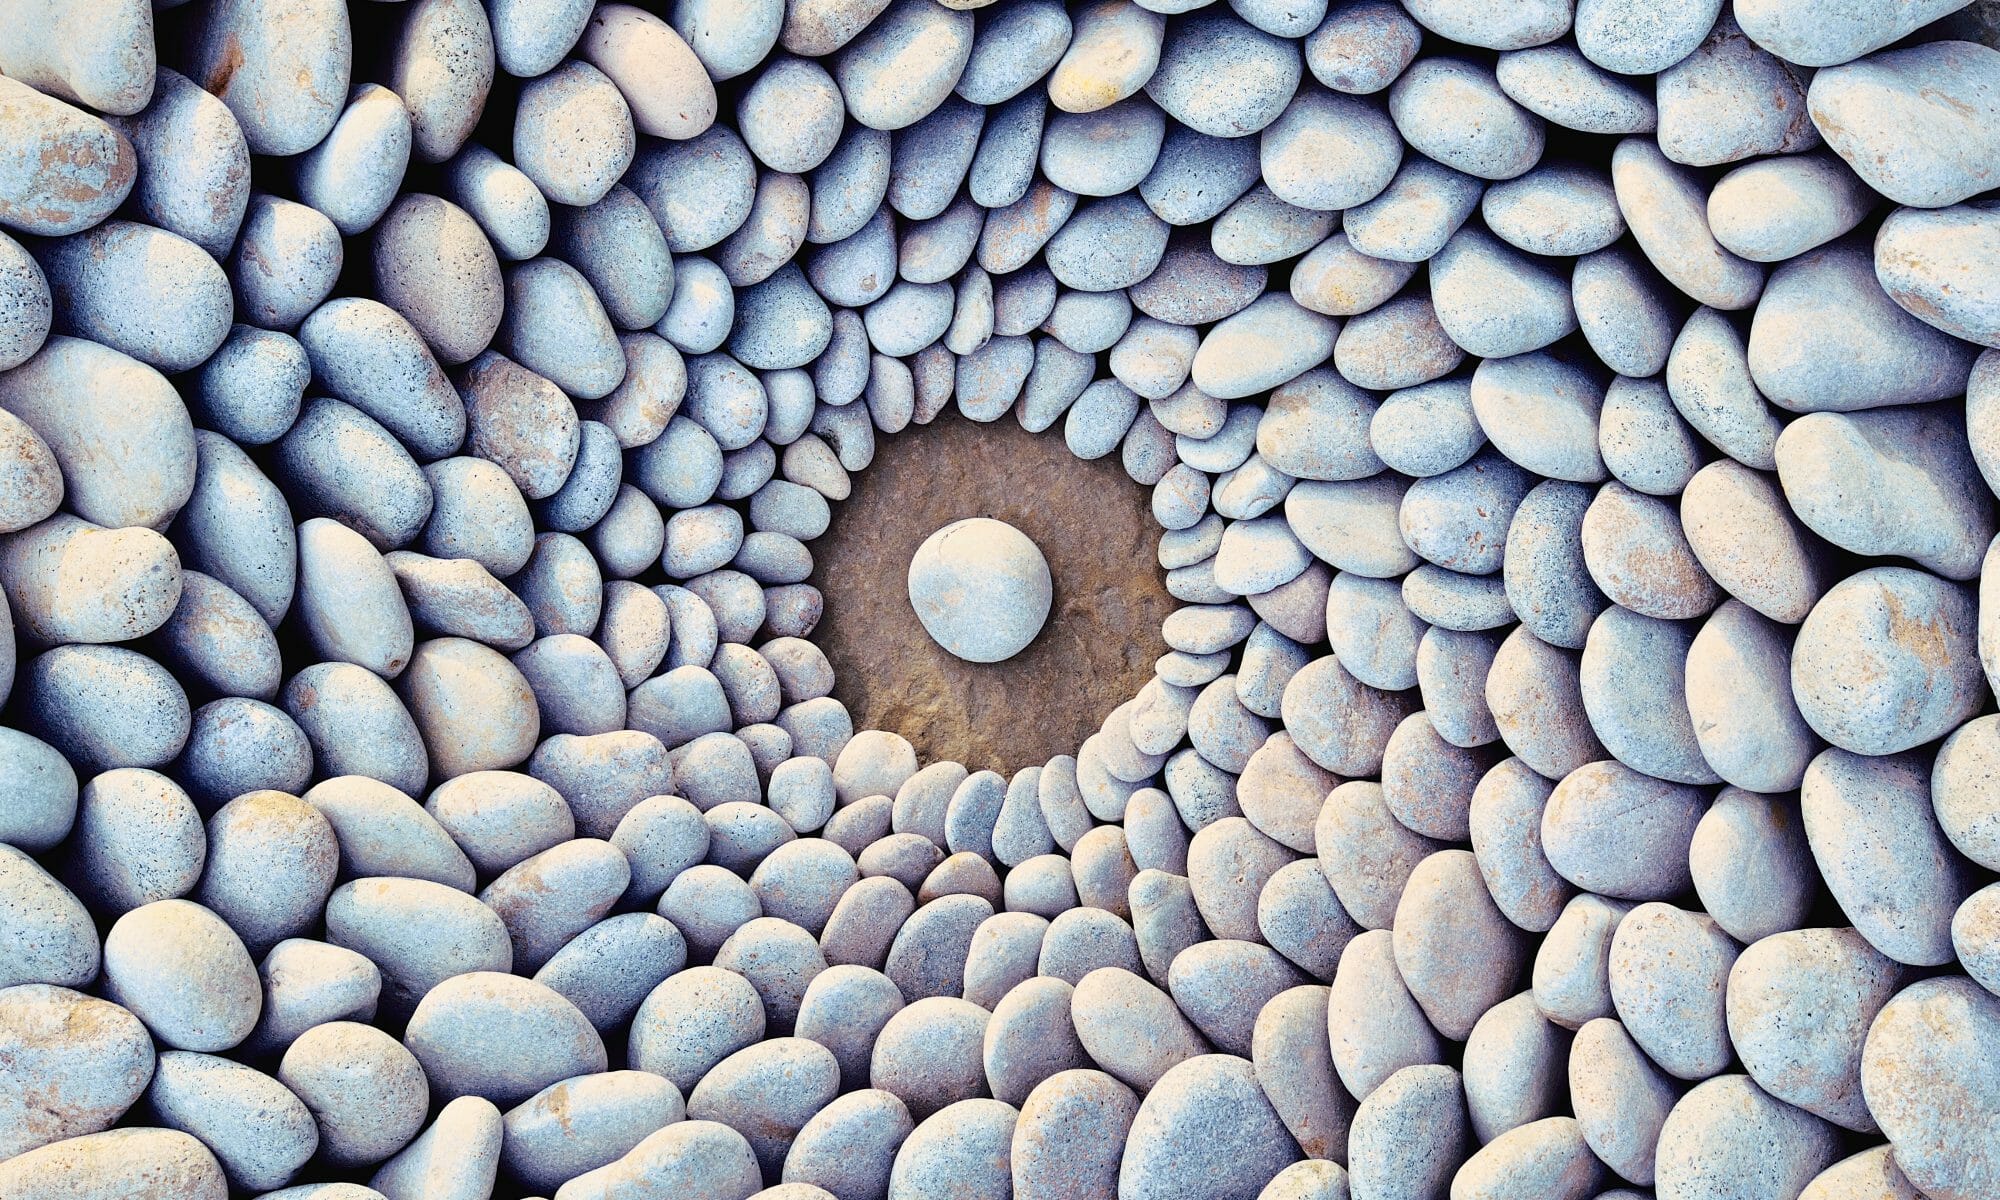 Sea stones laid out in the form of a circle to symbolize ketamine group therapy